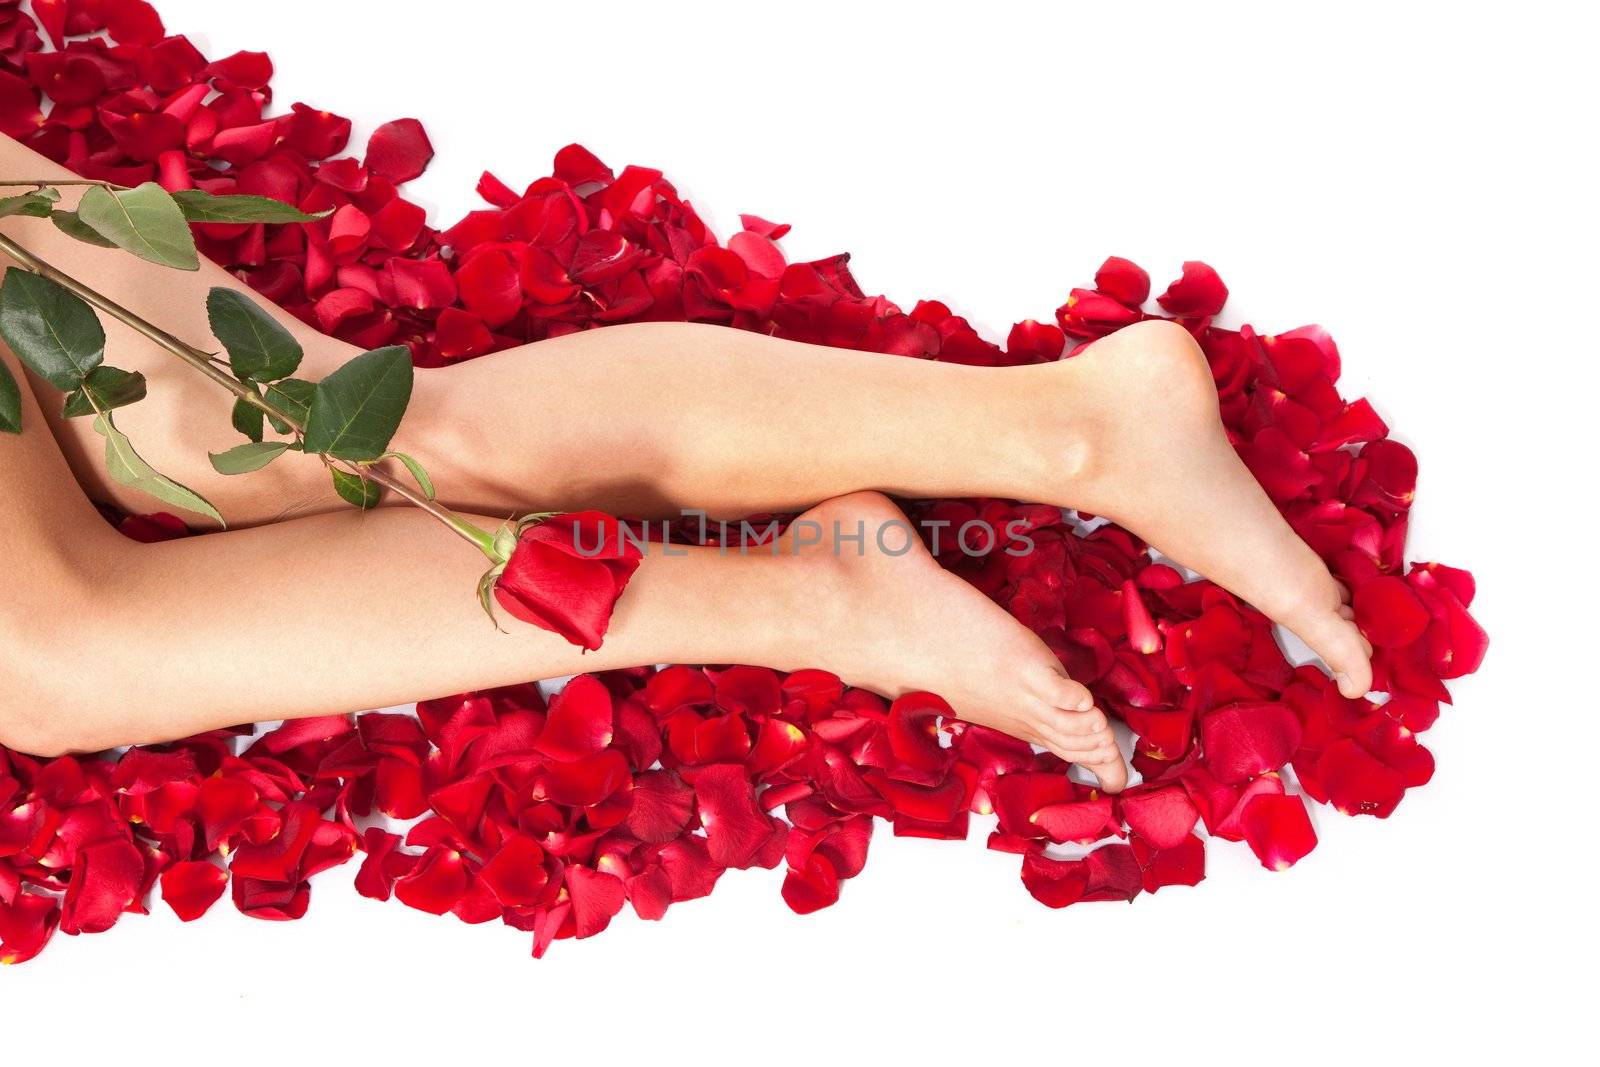 Woman against petals of red roses by bloodua